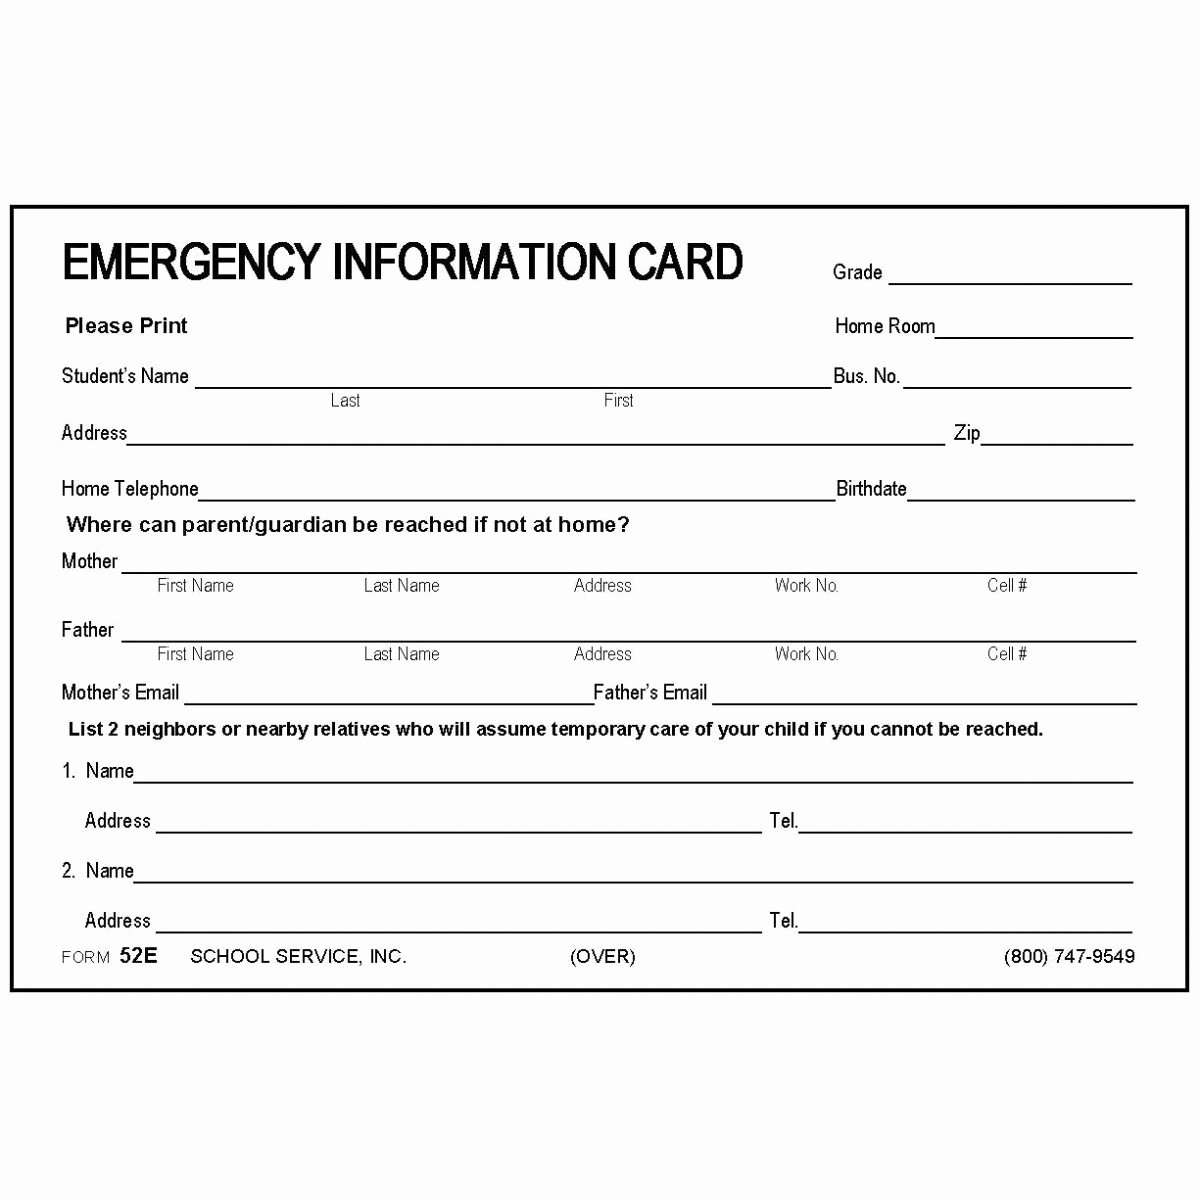 Emergency Contact form Template Beautiful 52e Emergency Information Card 4 X 6 Size